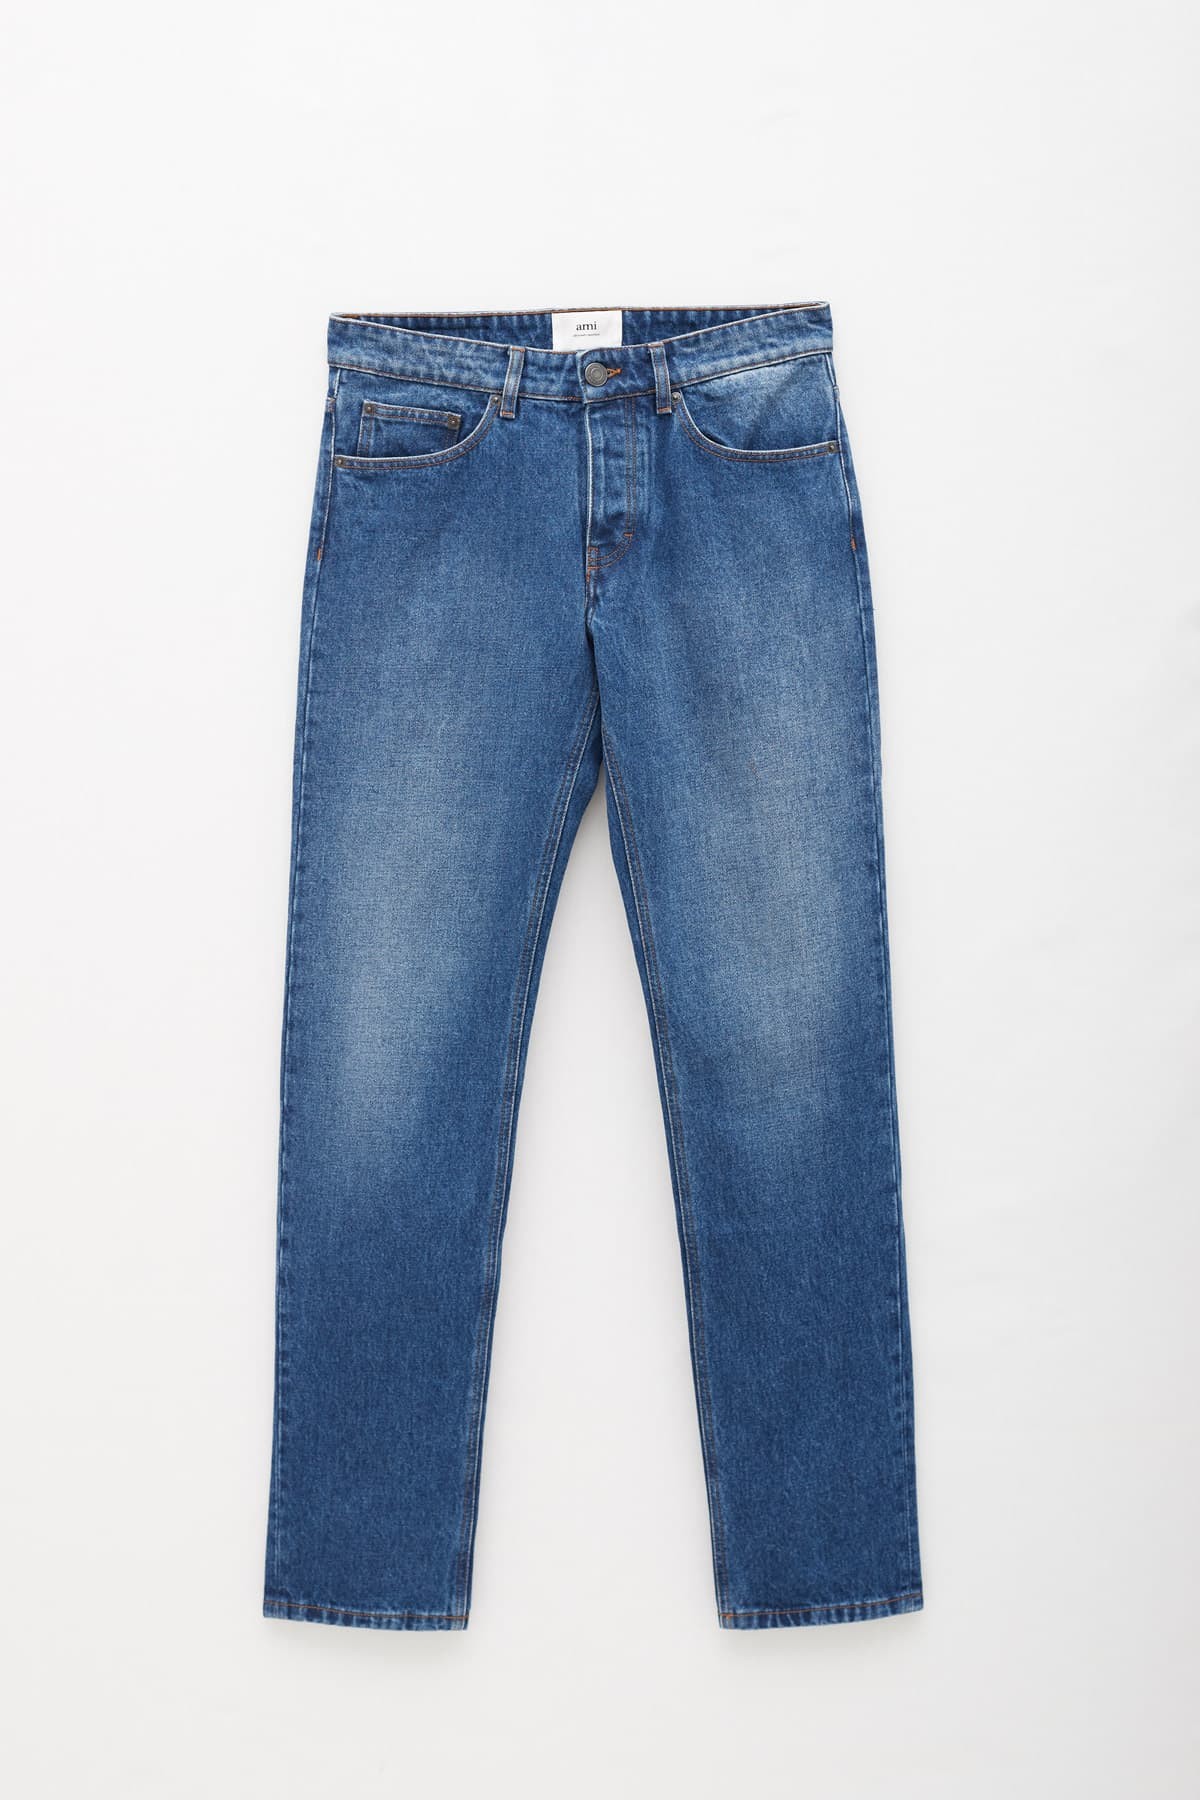 AMI USED BLUE CLASSIC FIT JEANS | IAMNUE